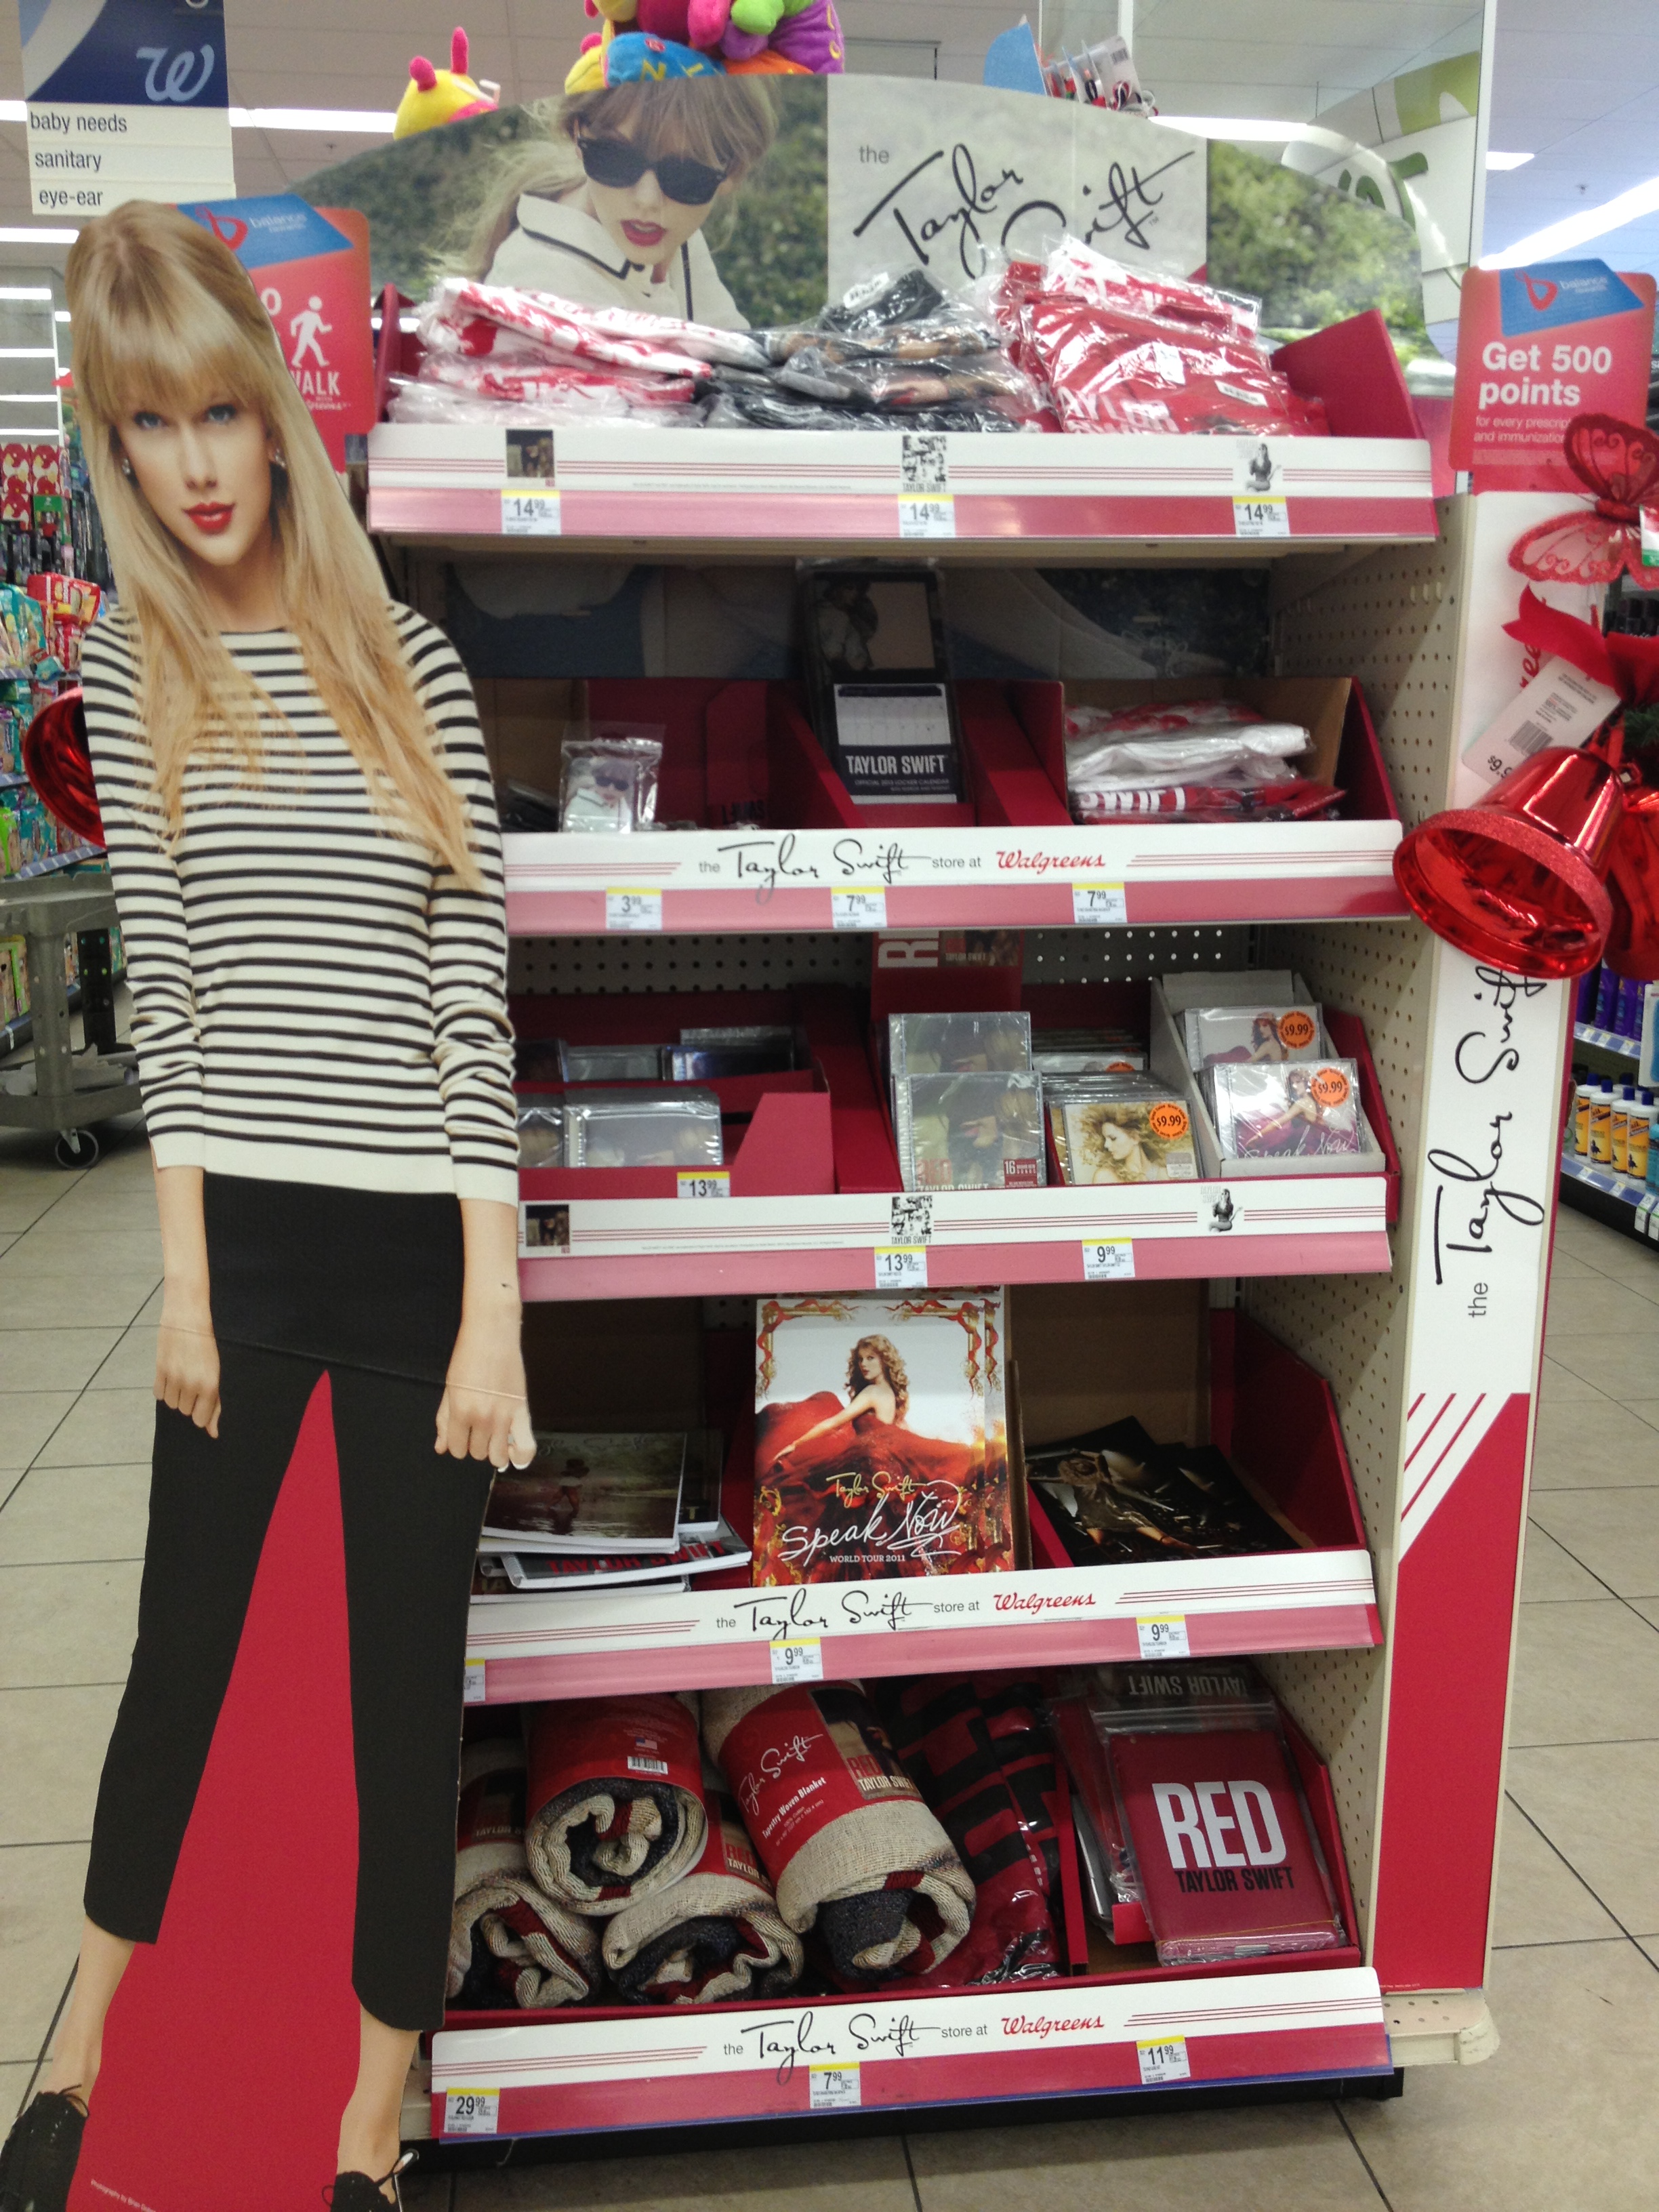 Taylor Swift Merchandise Exclusively at Walgreens | dtlalifestyle2448 x 3264